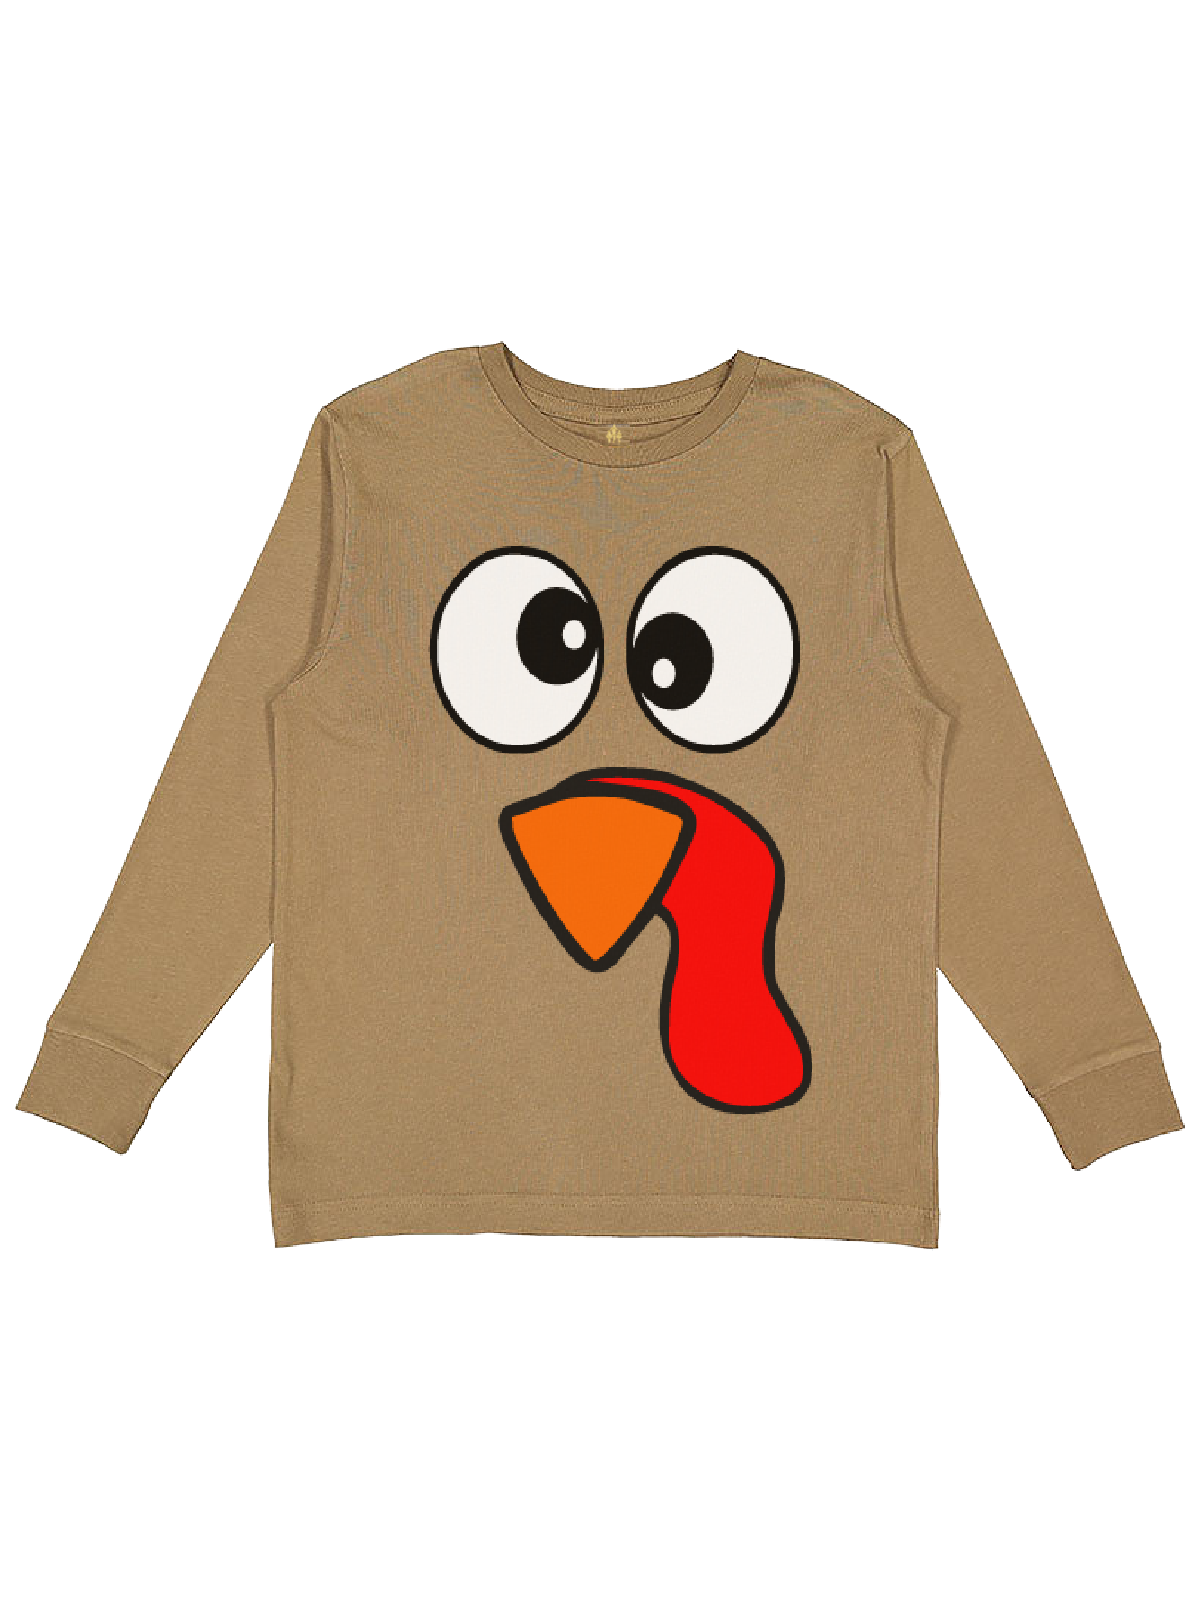 Boys Turkey Face Thanksgiving Shirt in Coyote Brown